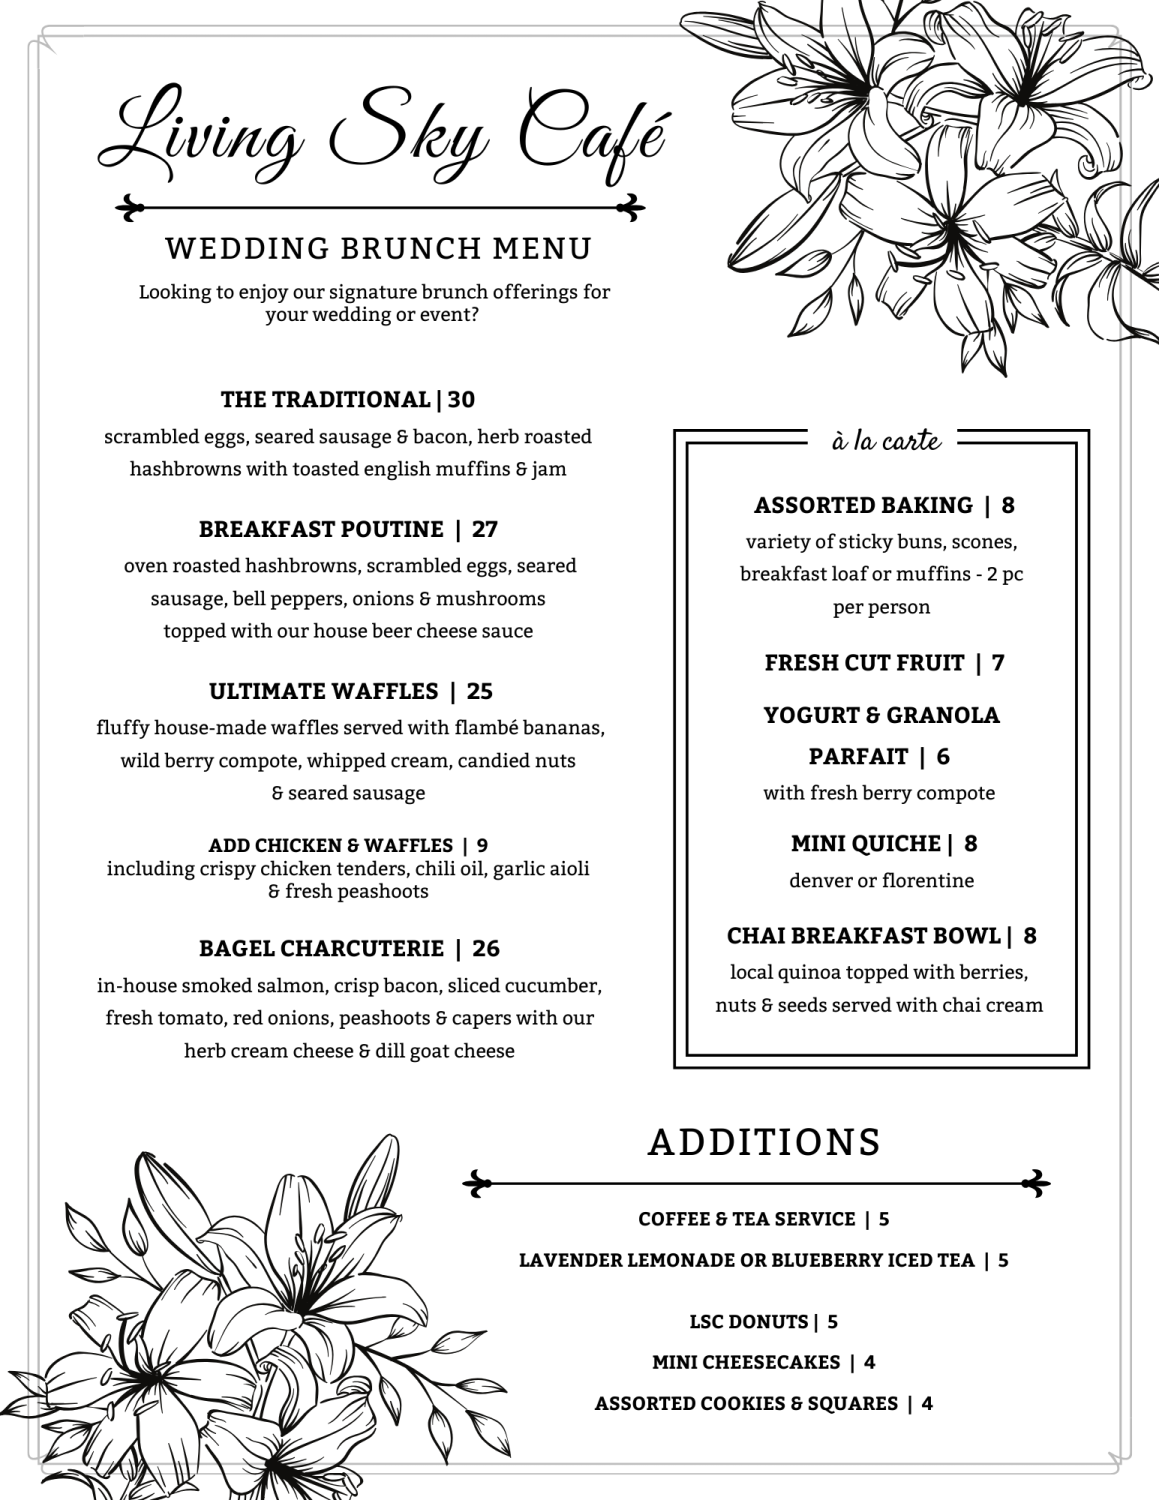 Living Sky Café wedding brunch menu. Includes waffles, bagel charcuterie and the traditional breakfast.